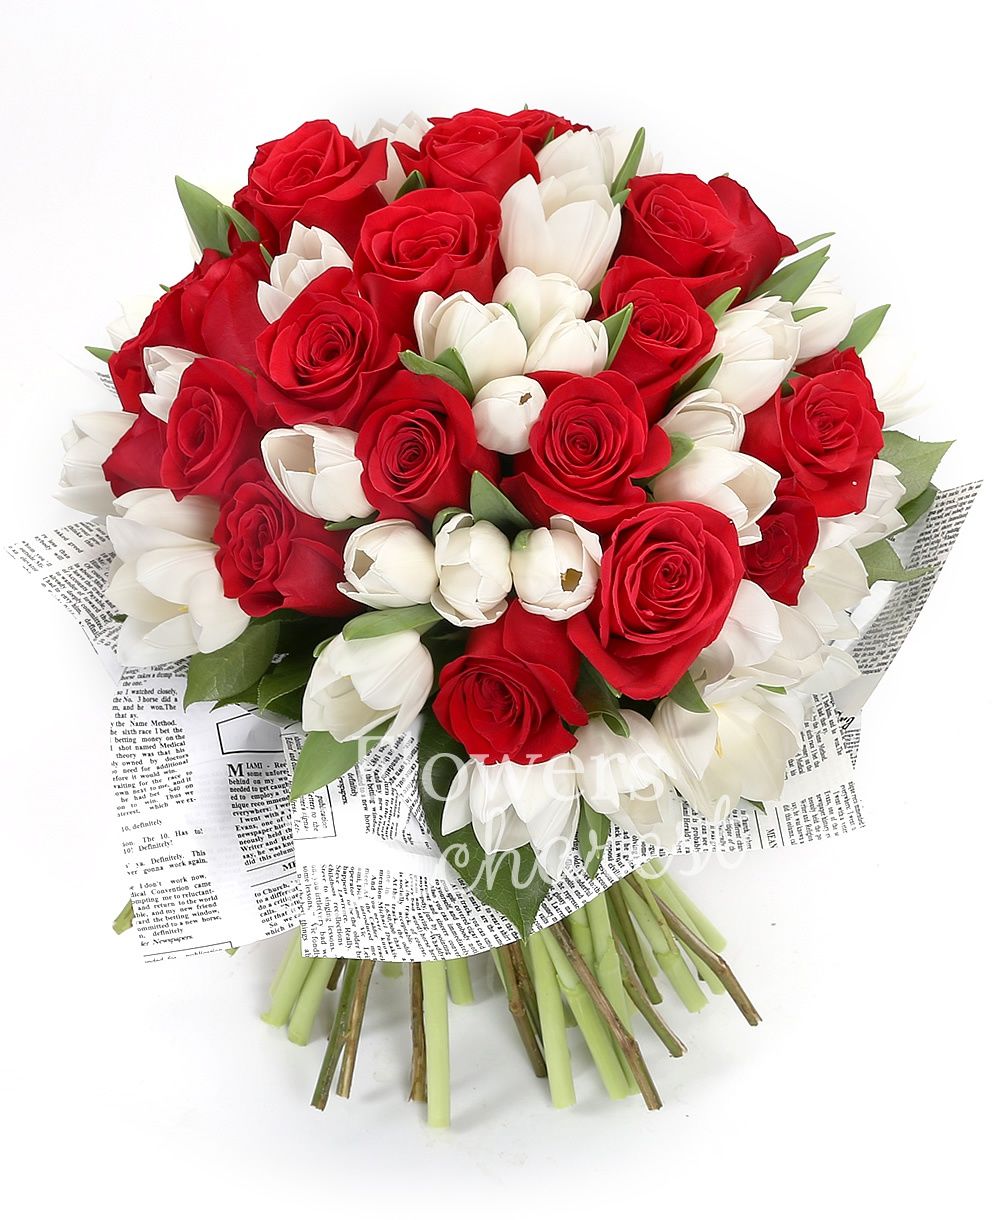 25 red roses, 30 white tulips, greenery